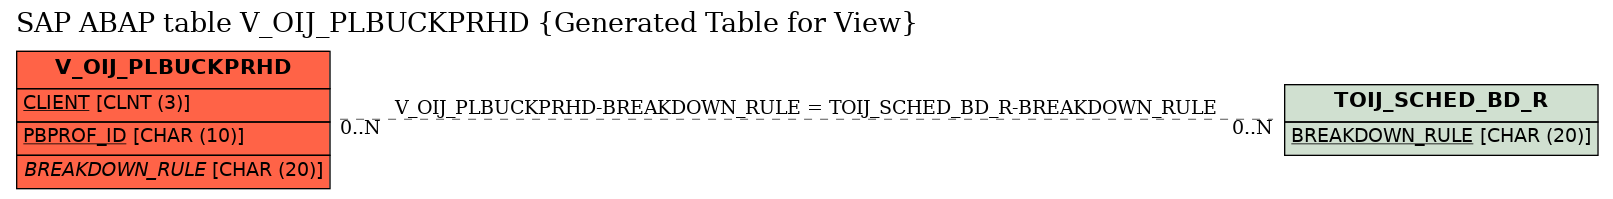 E-R Diagram for table V_OIJ_PLBUCKPRHD (Generated Table for View)